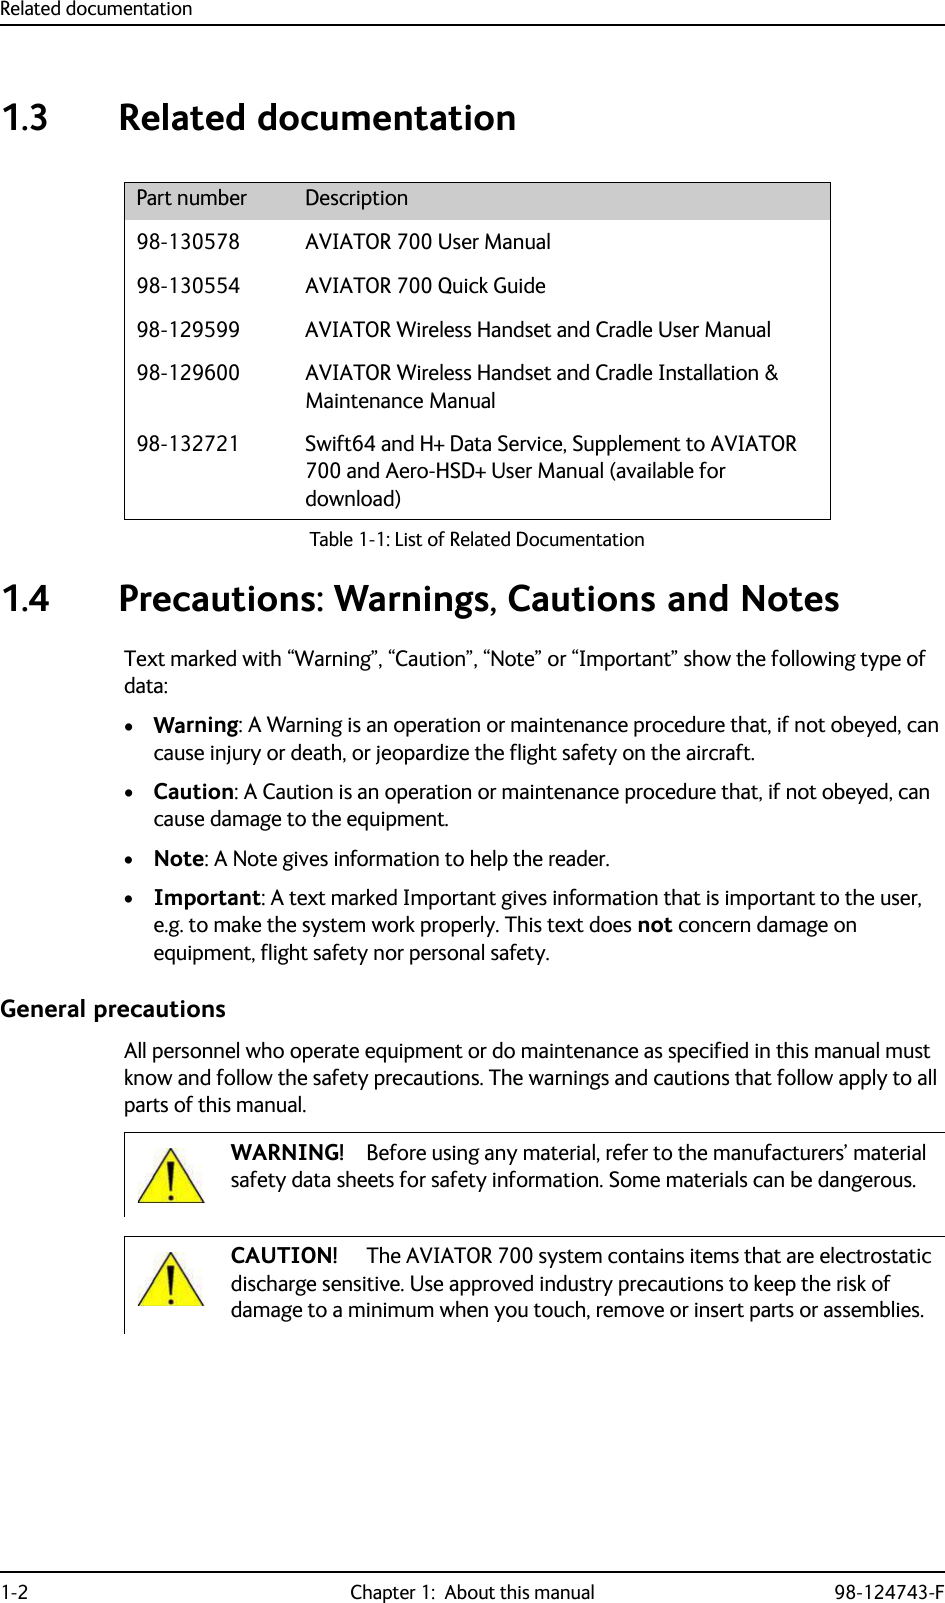 Related documentation1-2 Chapter 1:  About this manual 98-124743-F1.3 Related documentation1.4 Precautions: Warnings, Cautions and NotesText marked with “Warning”, “Caution”, “Note” or “Important” show the following type of data:•Warning: A Warning is an operation or maintenance procedure that, if not obeyed, can cause injury or death, or jeopardize the flight safety on the aircraft. •Caution: A Caution is an operation or maintenance procedure that, if not obeyed, can cause damage to the equipment.•Note: A Note gives information to help the reader.•Important: A text marked Important gives information that is important to the user, e.g. to make the system work properly. This text does not concern damage on equipment, flight safety nor personal safety.General precautionsAll personnel who operate equipment or do maintenance as specified in this manual must know and follow the safety precautions. The warnings and cautions that follow apply to all parts of this manual.Part number Description98-130578 AVIATOR 700 User Manual98-130554 AVIATOR 700 Quick Guide98-129599 AVIATOR Wireless Handset and Cradle User Manual98-129600 AVIATOR Wireless Handset and Cradle Installation &amp; Maintenance Manual98-132721 Swift64 and H+ Data Service, Supplement to AVIATOR 700 and Aero-HSD+ User Manual (available for download)Table 1-1: List of Related DocumentationWARNING! Before using any material, refer to the manufacturers’ material safety data sheets for safety information. Some materials can be dangerous.CAUTION! The AVIATOR 700 system contains items that are electrostatic discharge sensitive. Use approved industry precautions to keep the risk of damage to a minimum when you touch, remove or insert parts or assemblies.